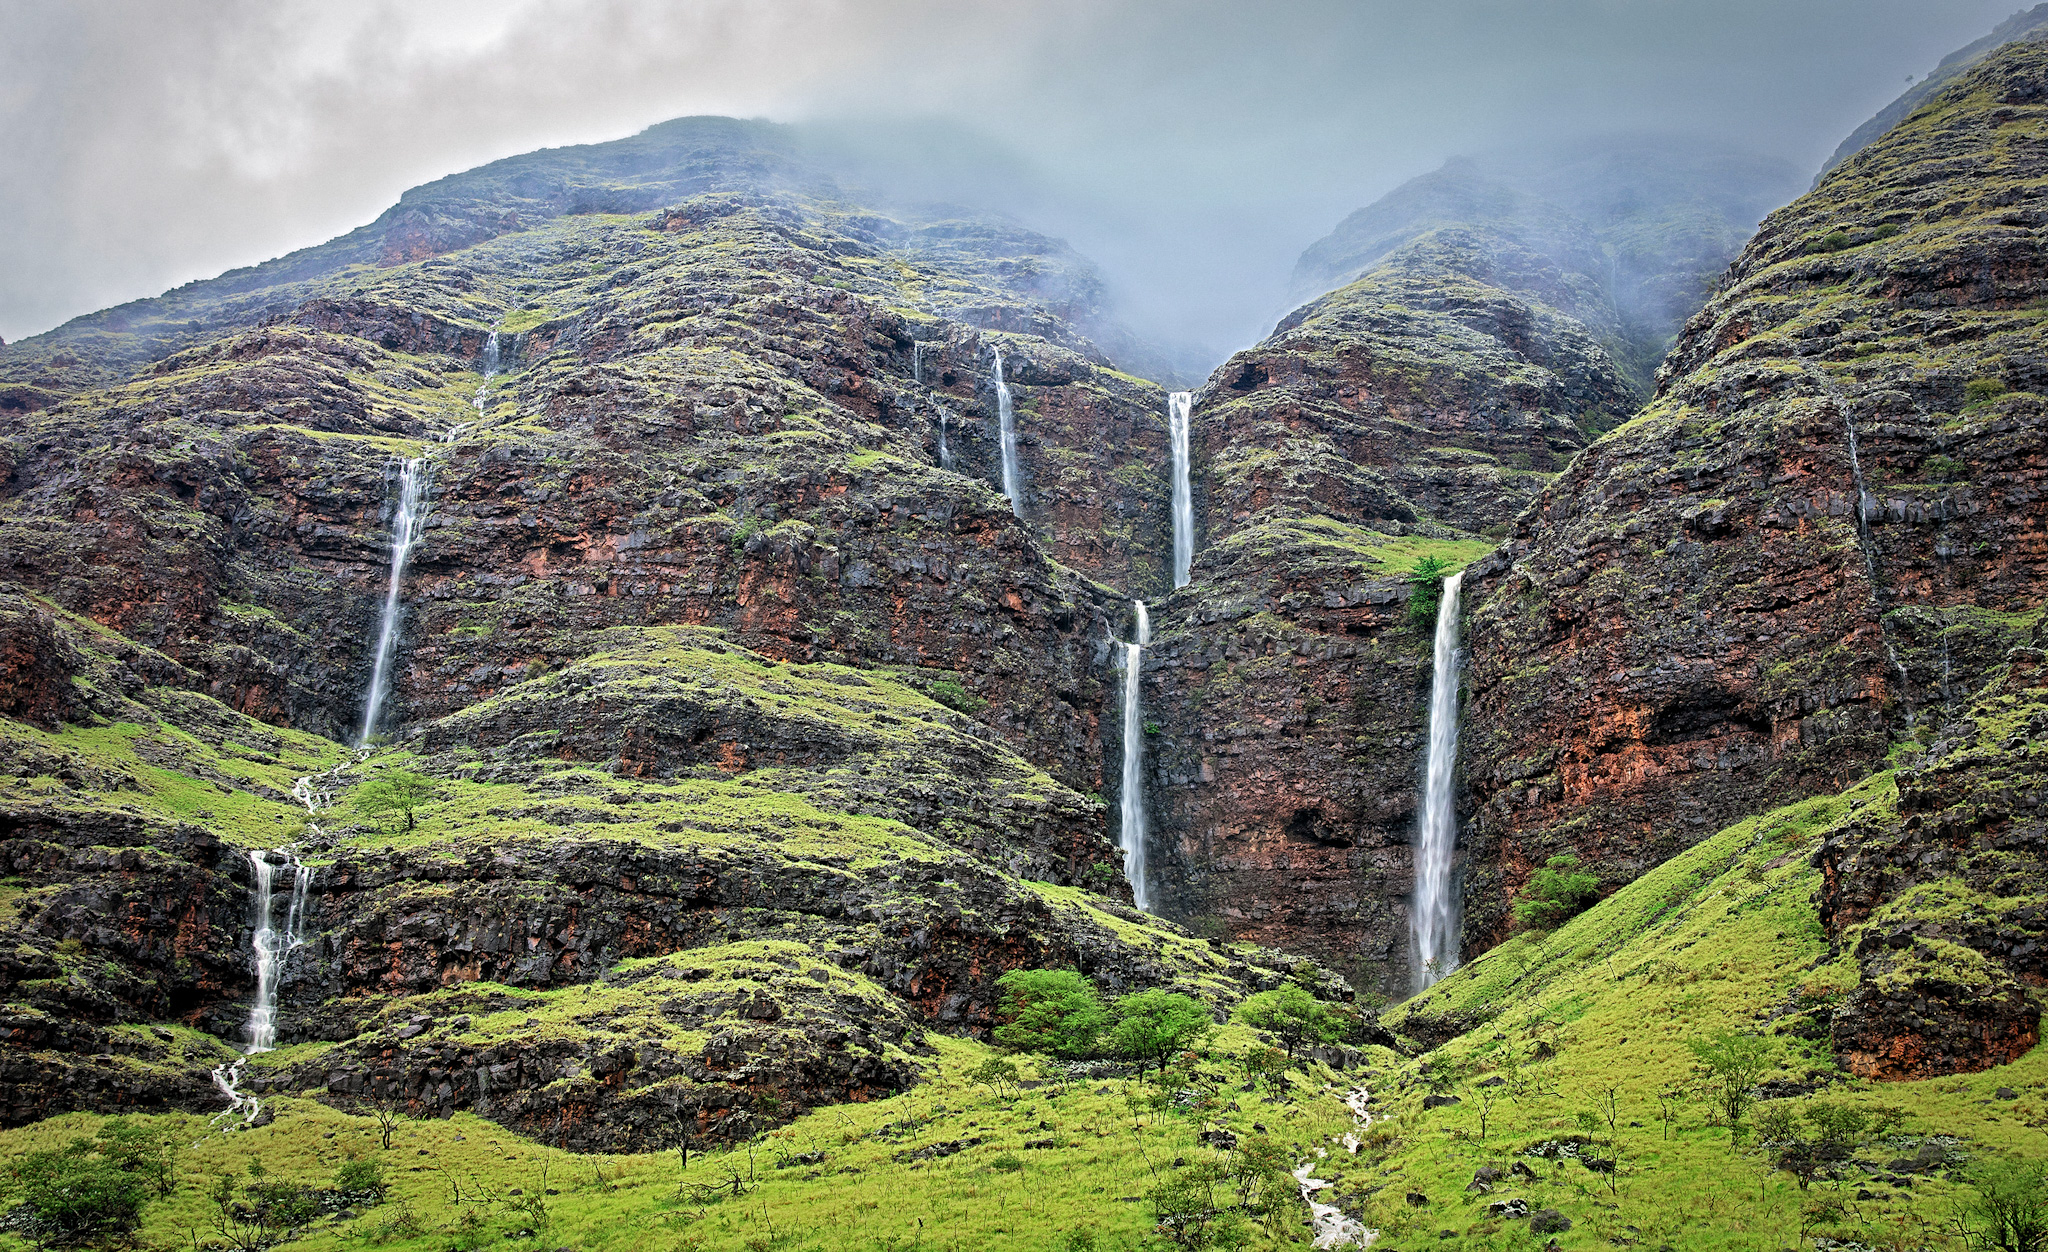 Cascading waterfalls in the green mountains of Makaha Valley